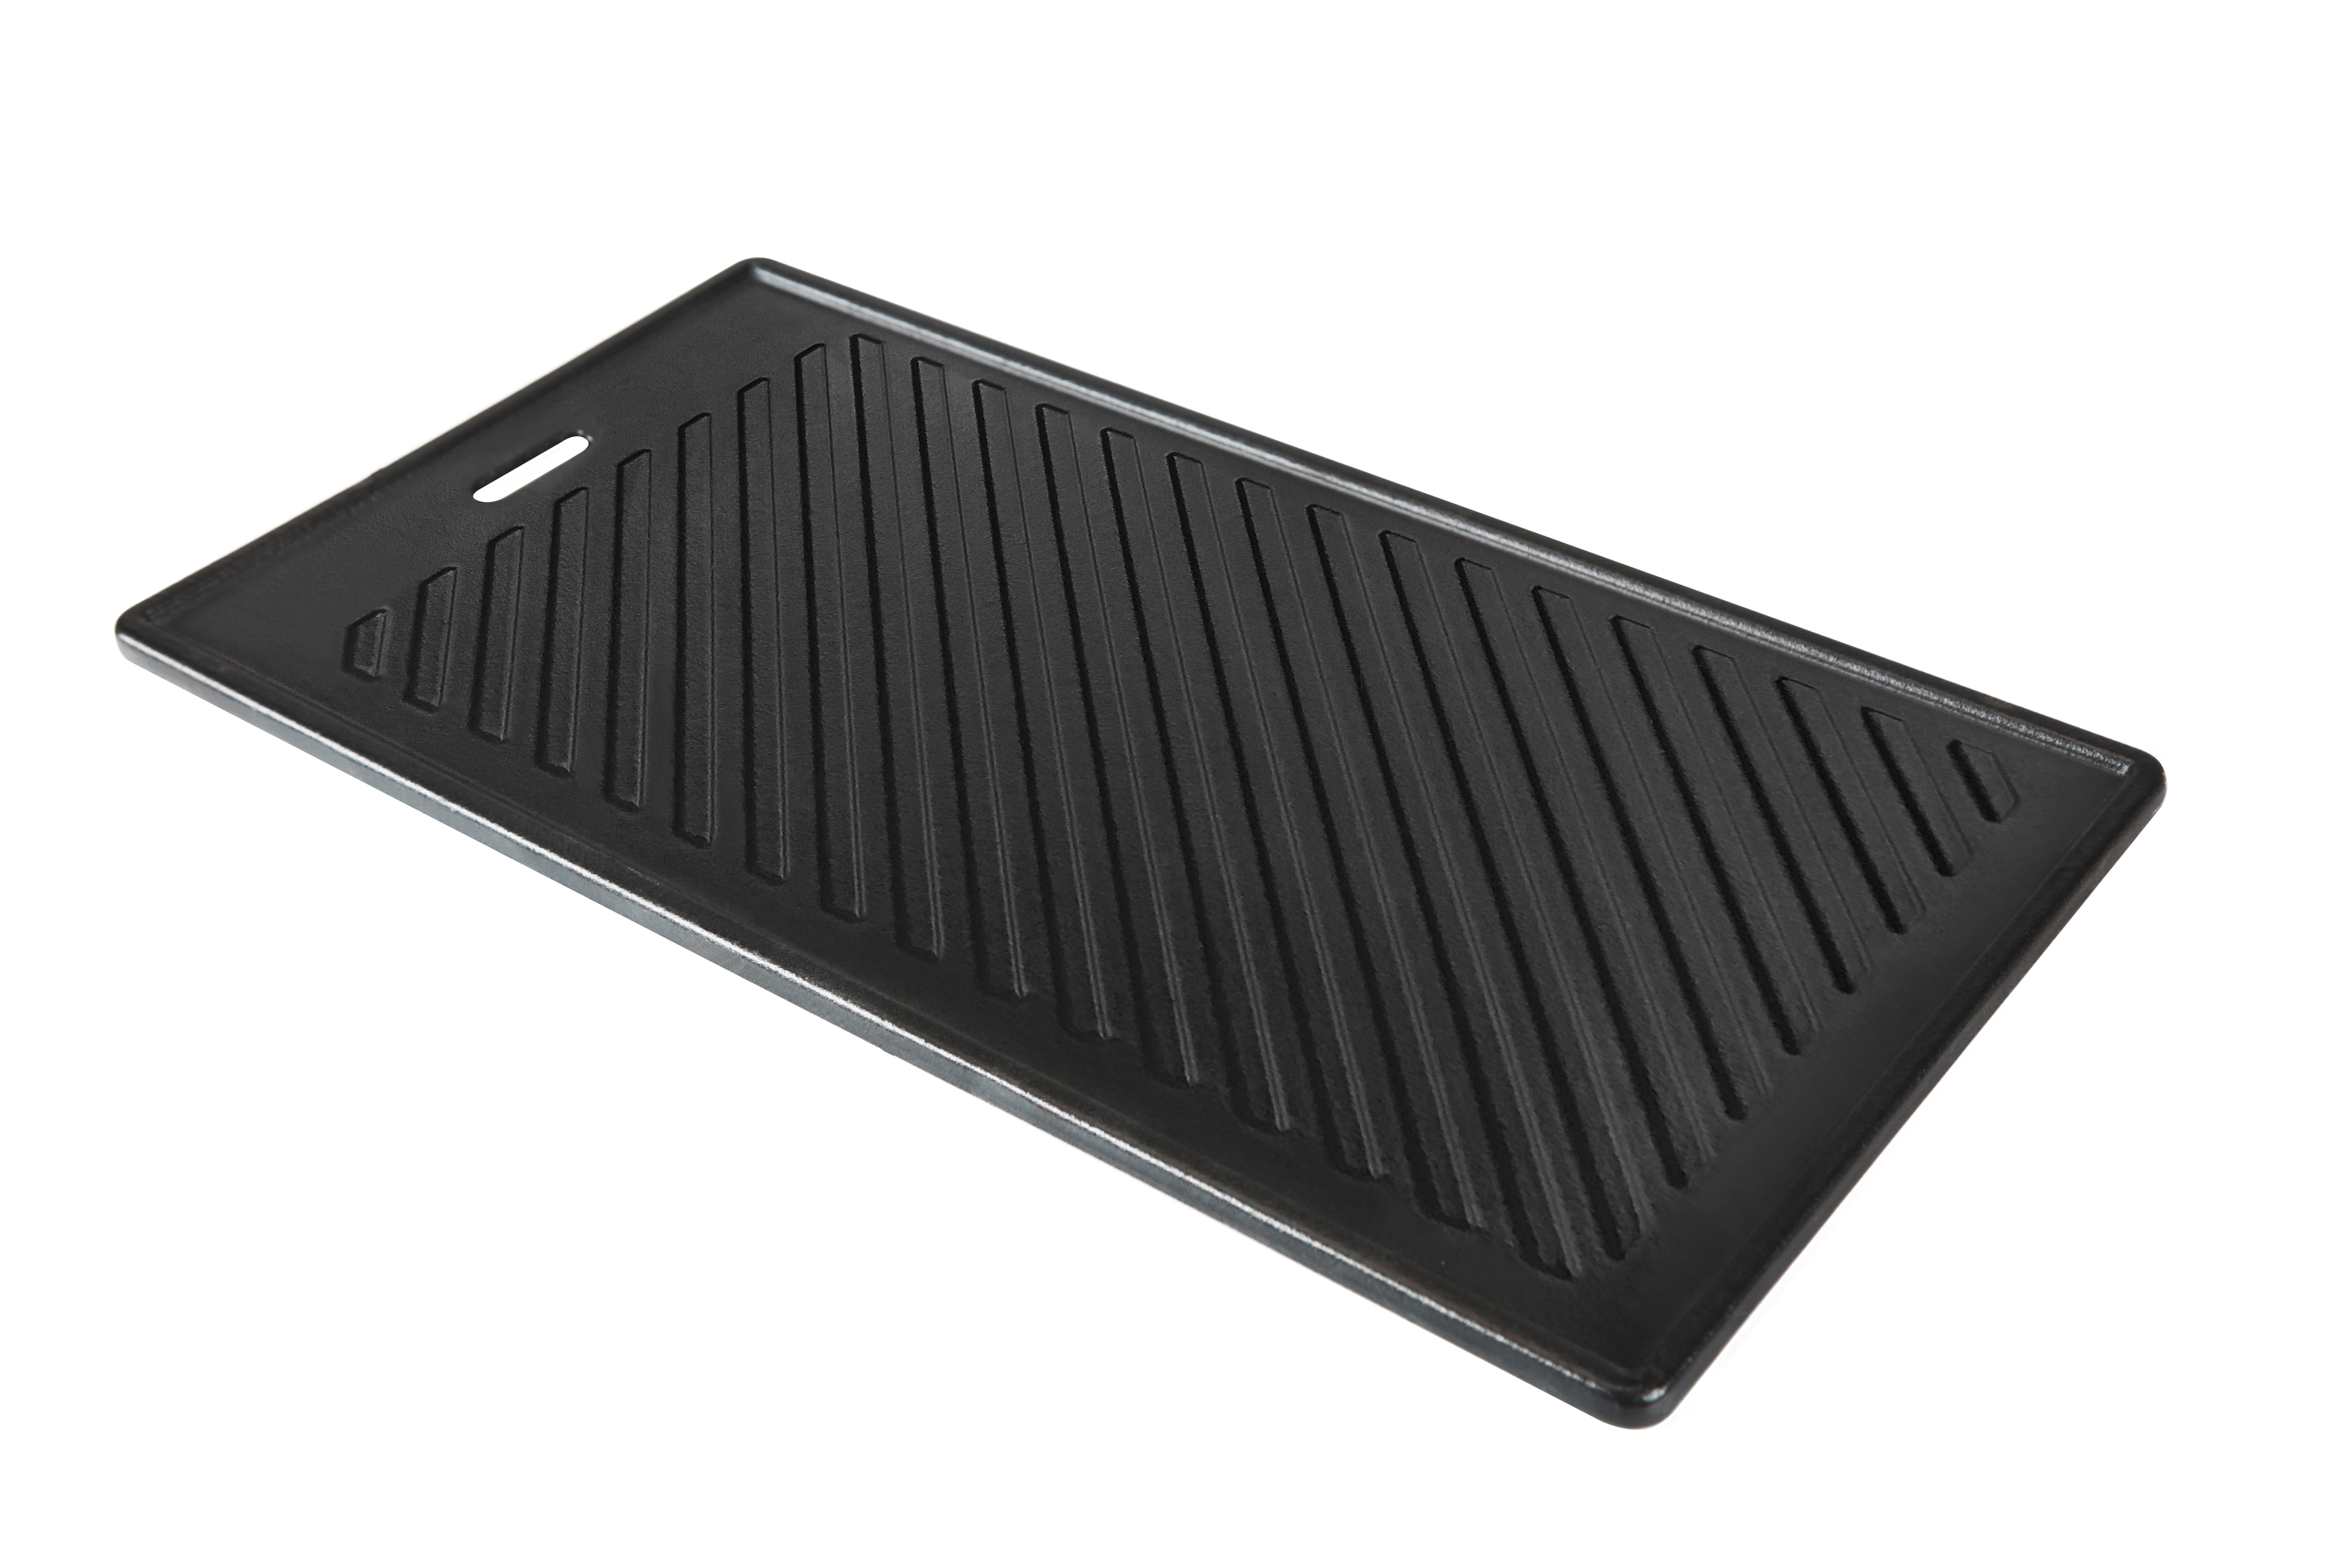 Barbecue griddle plate